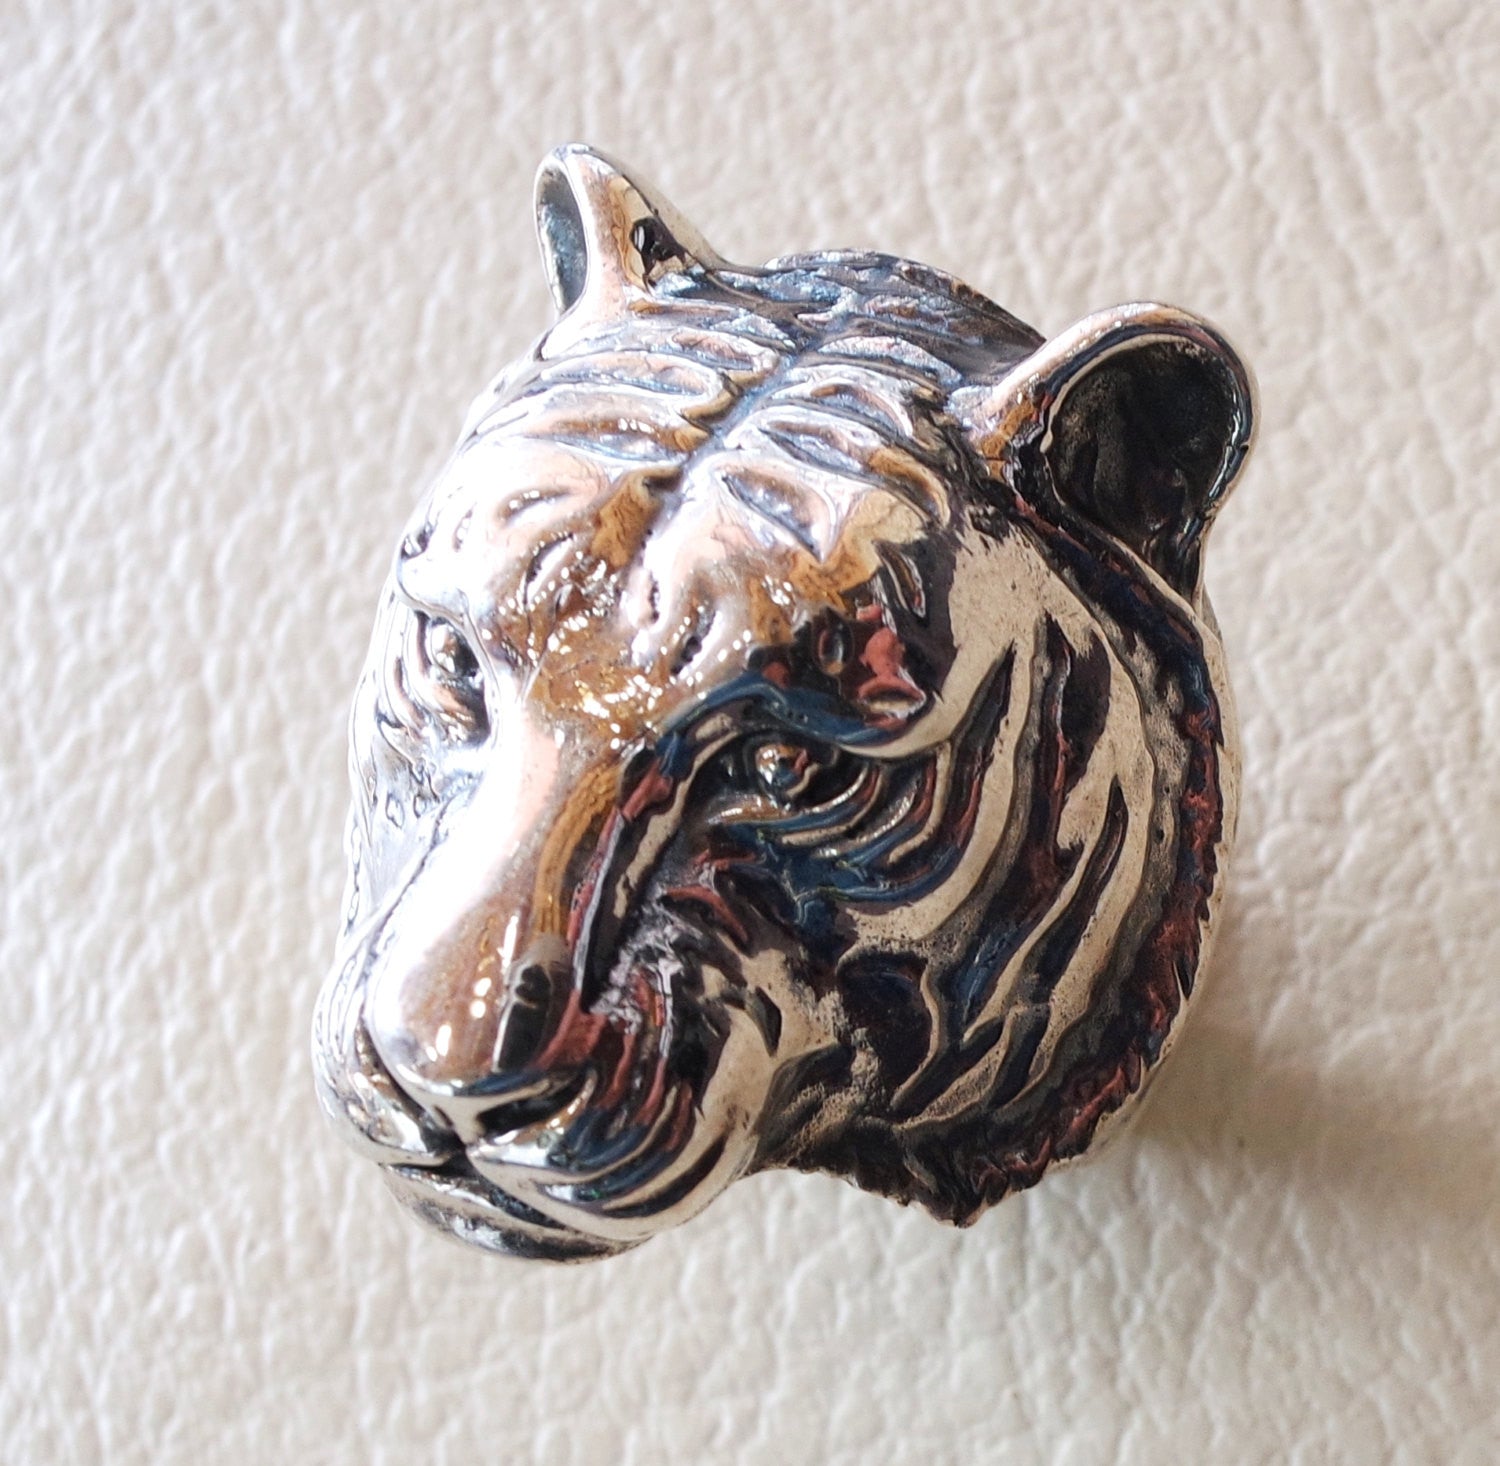 huge bengal tiger very heavy sterling silver 925 man biker ring all sizes handmade animal head jewelry fast shipping detailed craftsmanship